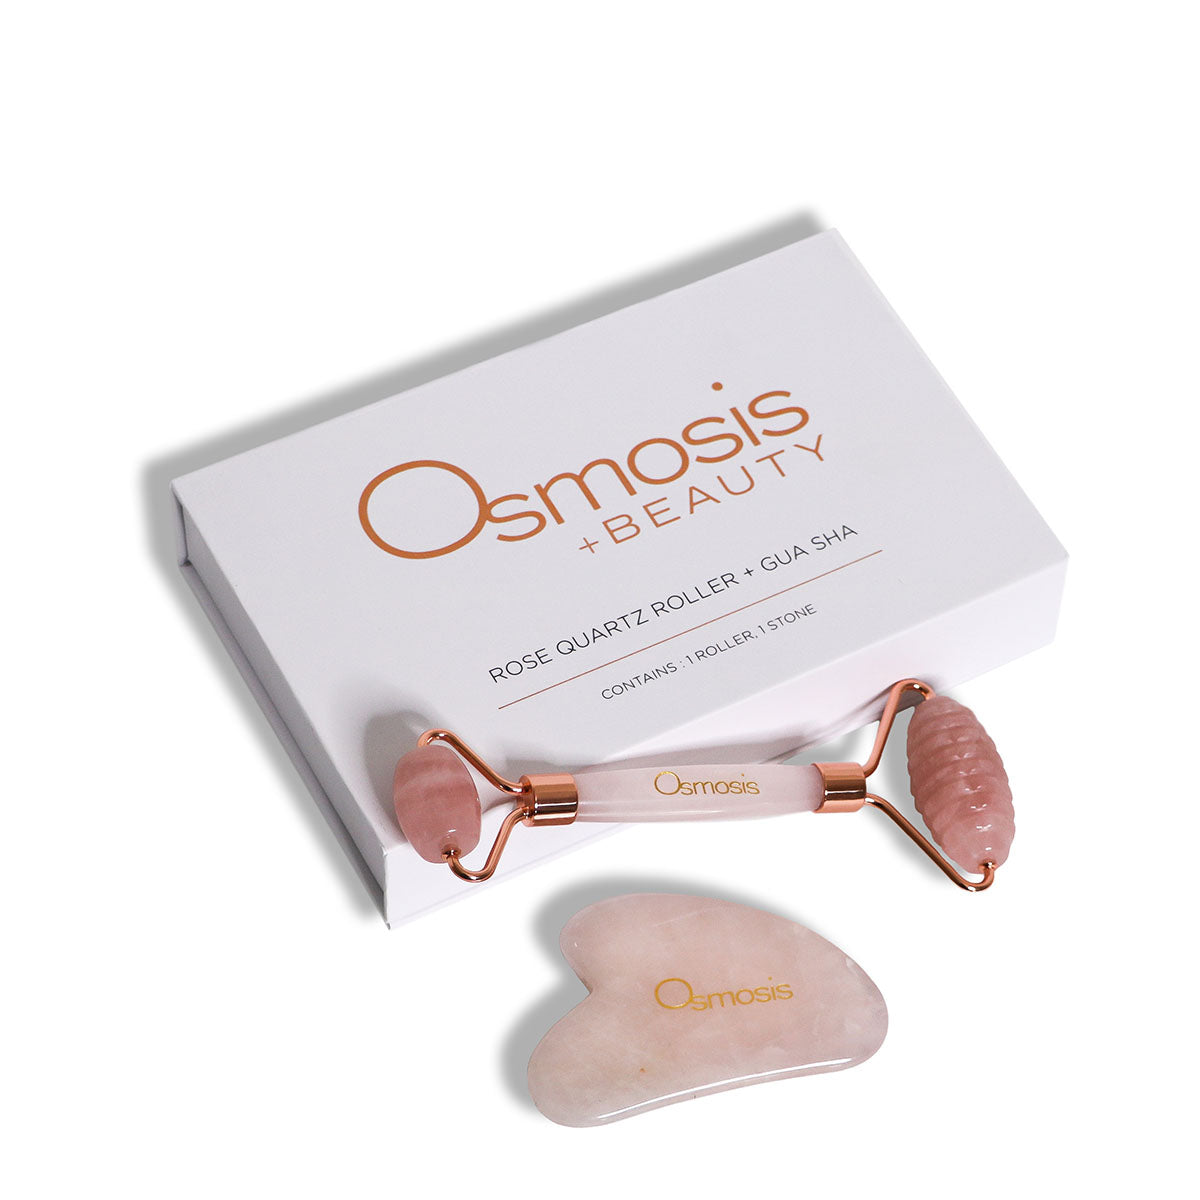 Osmosis Quartz roller and Gua Sha stone increase circulation and penetrates product for more vibrant, healthier skin.